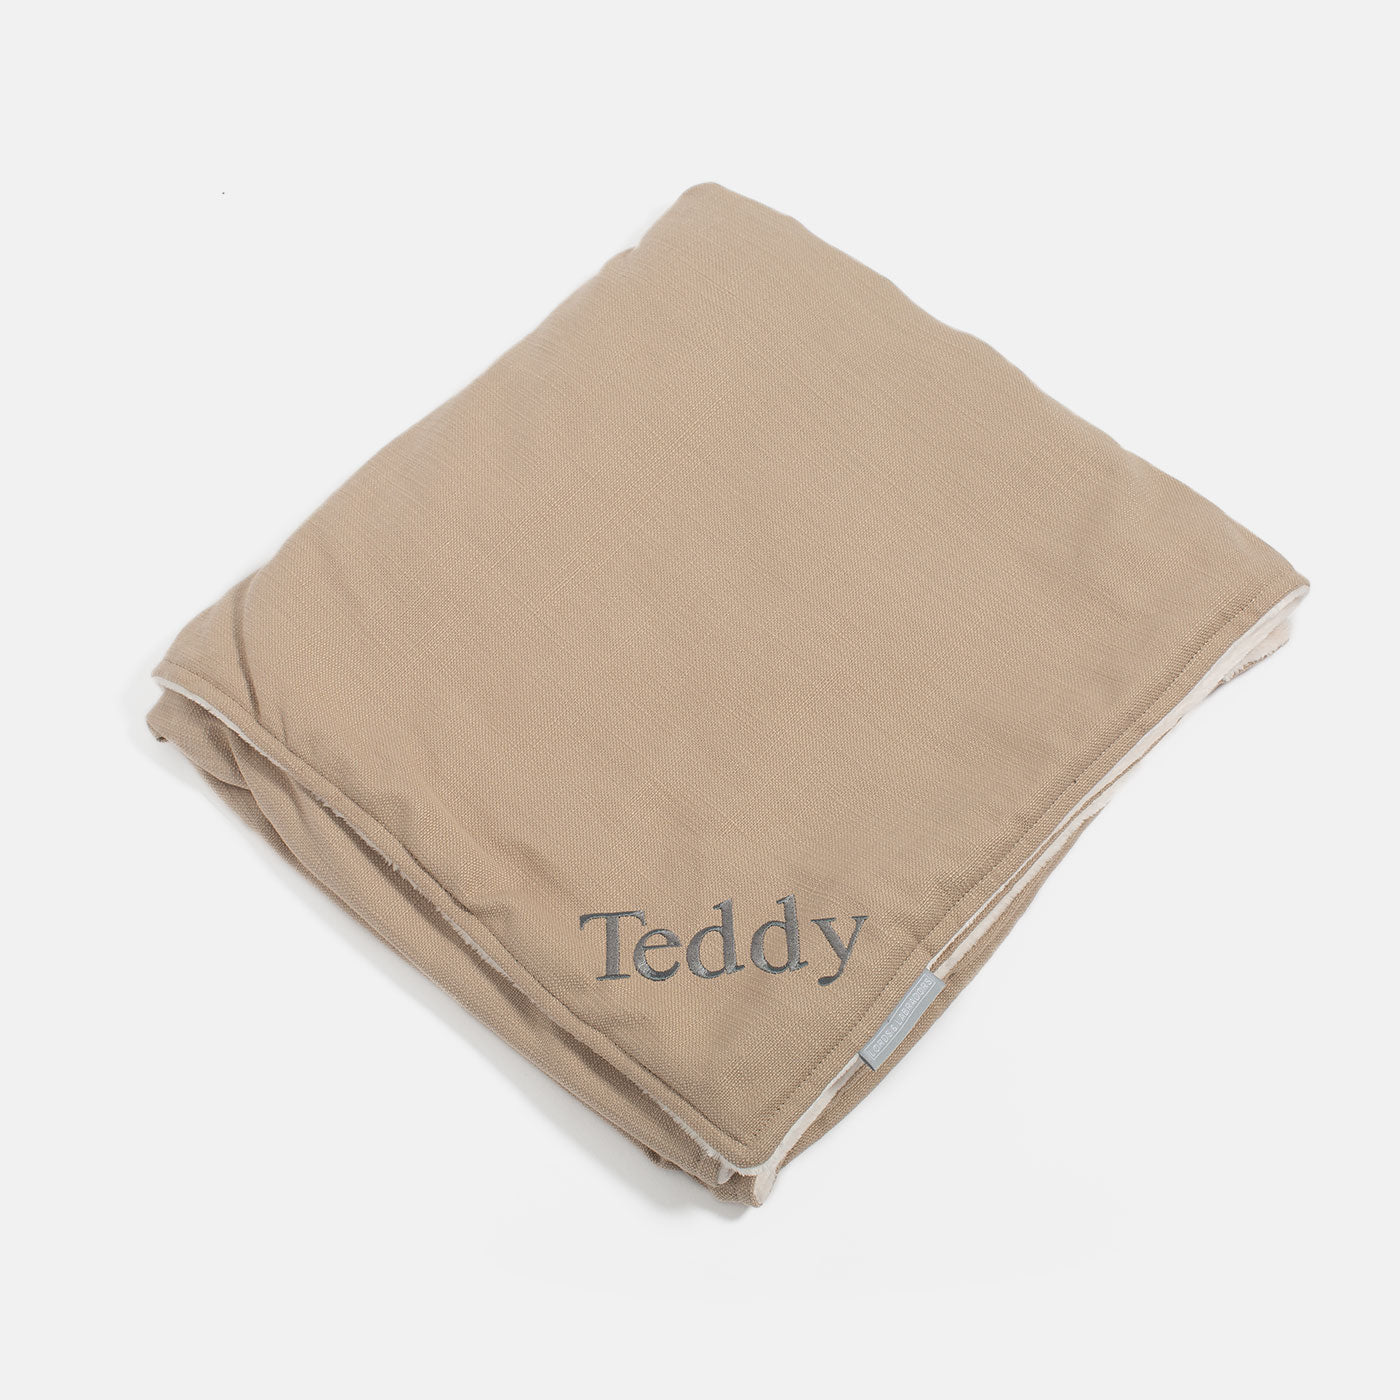 Discover Our Luxurious Savanna Oatmeal Dog Blanket With Super Soft Sherpa & Teddy Fleece, The Perfect Blanket For Puppies, Available To Personalize And In 2 Sizes Here at Lords & Labradors US